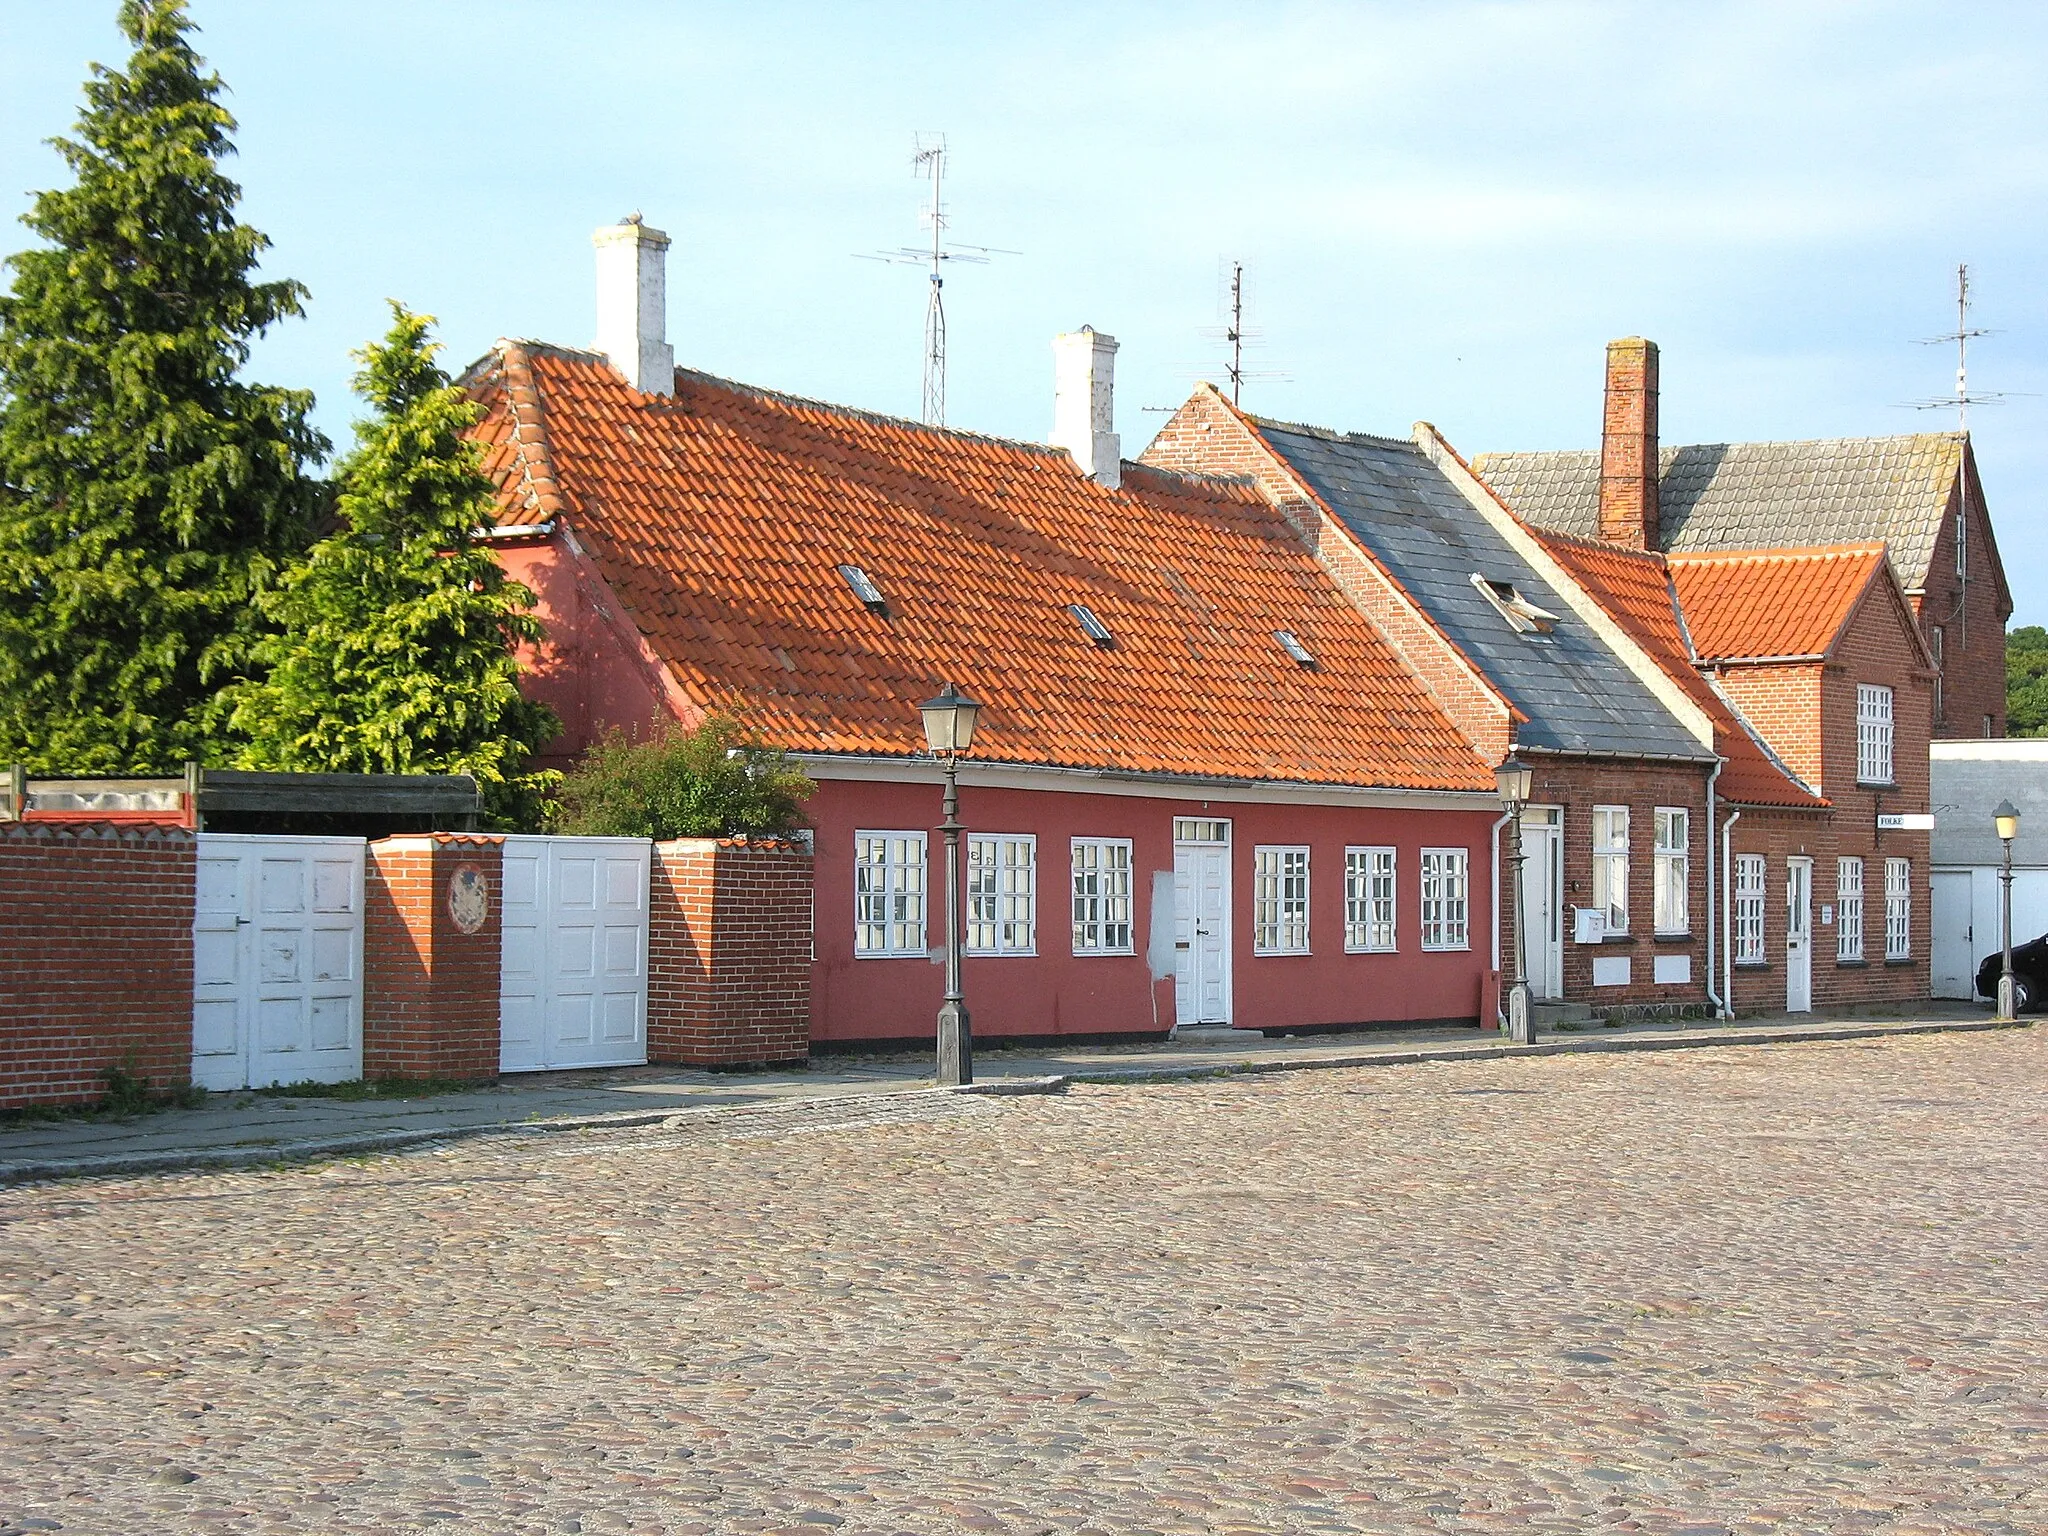 Photo showing: The old square in the small town "Rødby" located on the island Lolland in east Denmark.